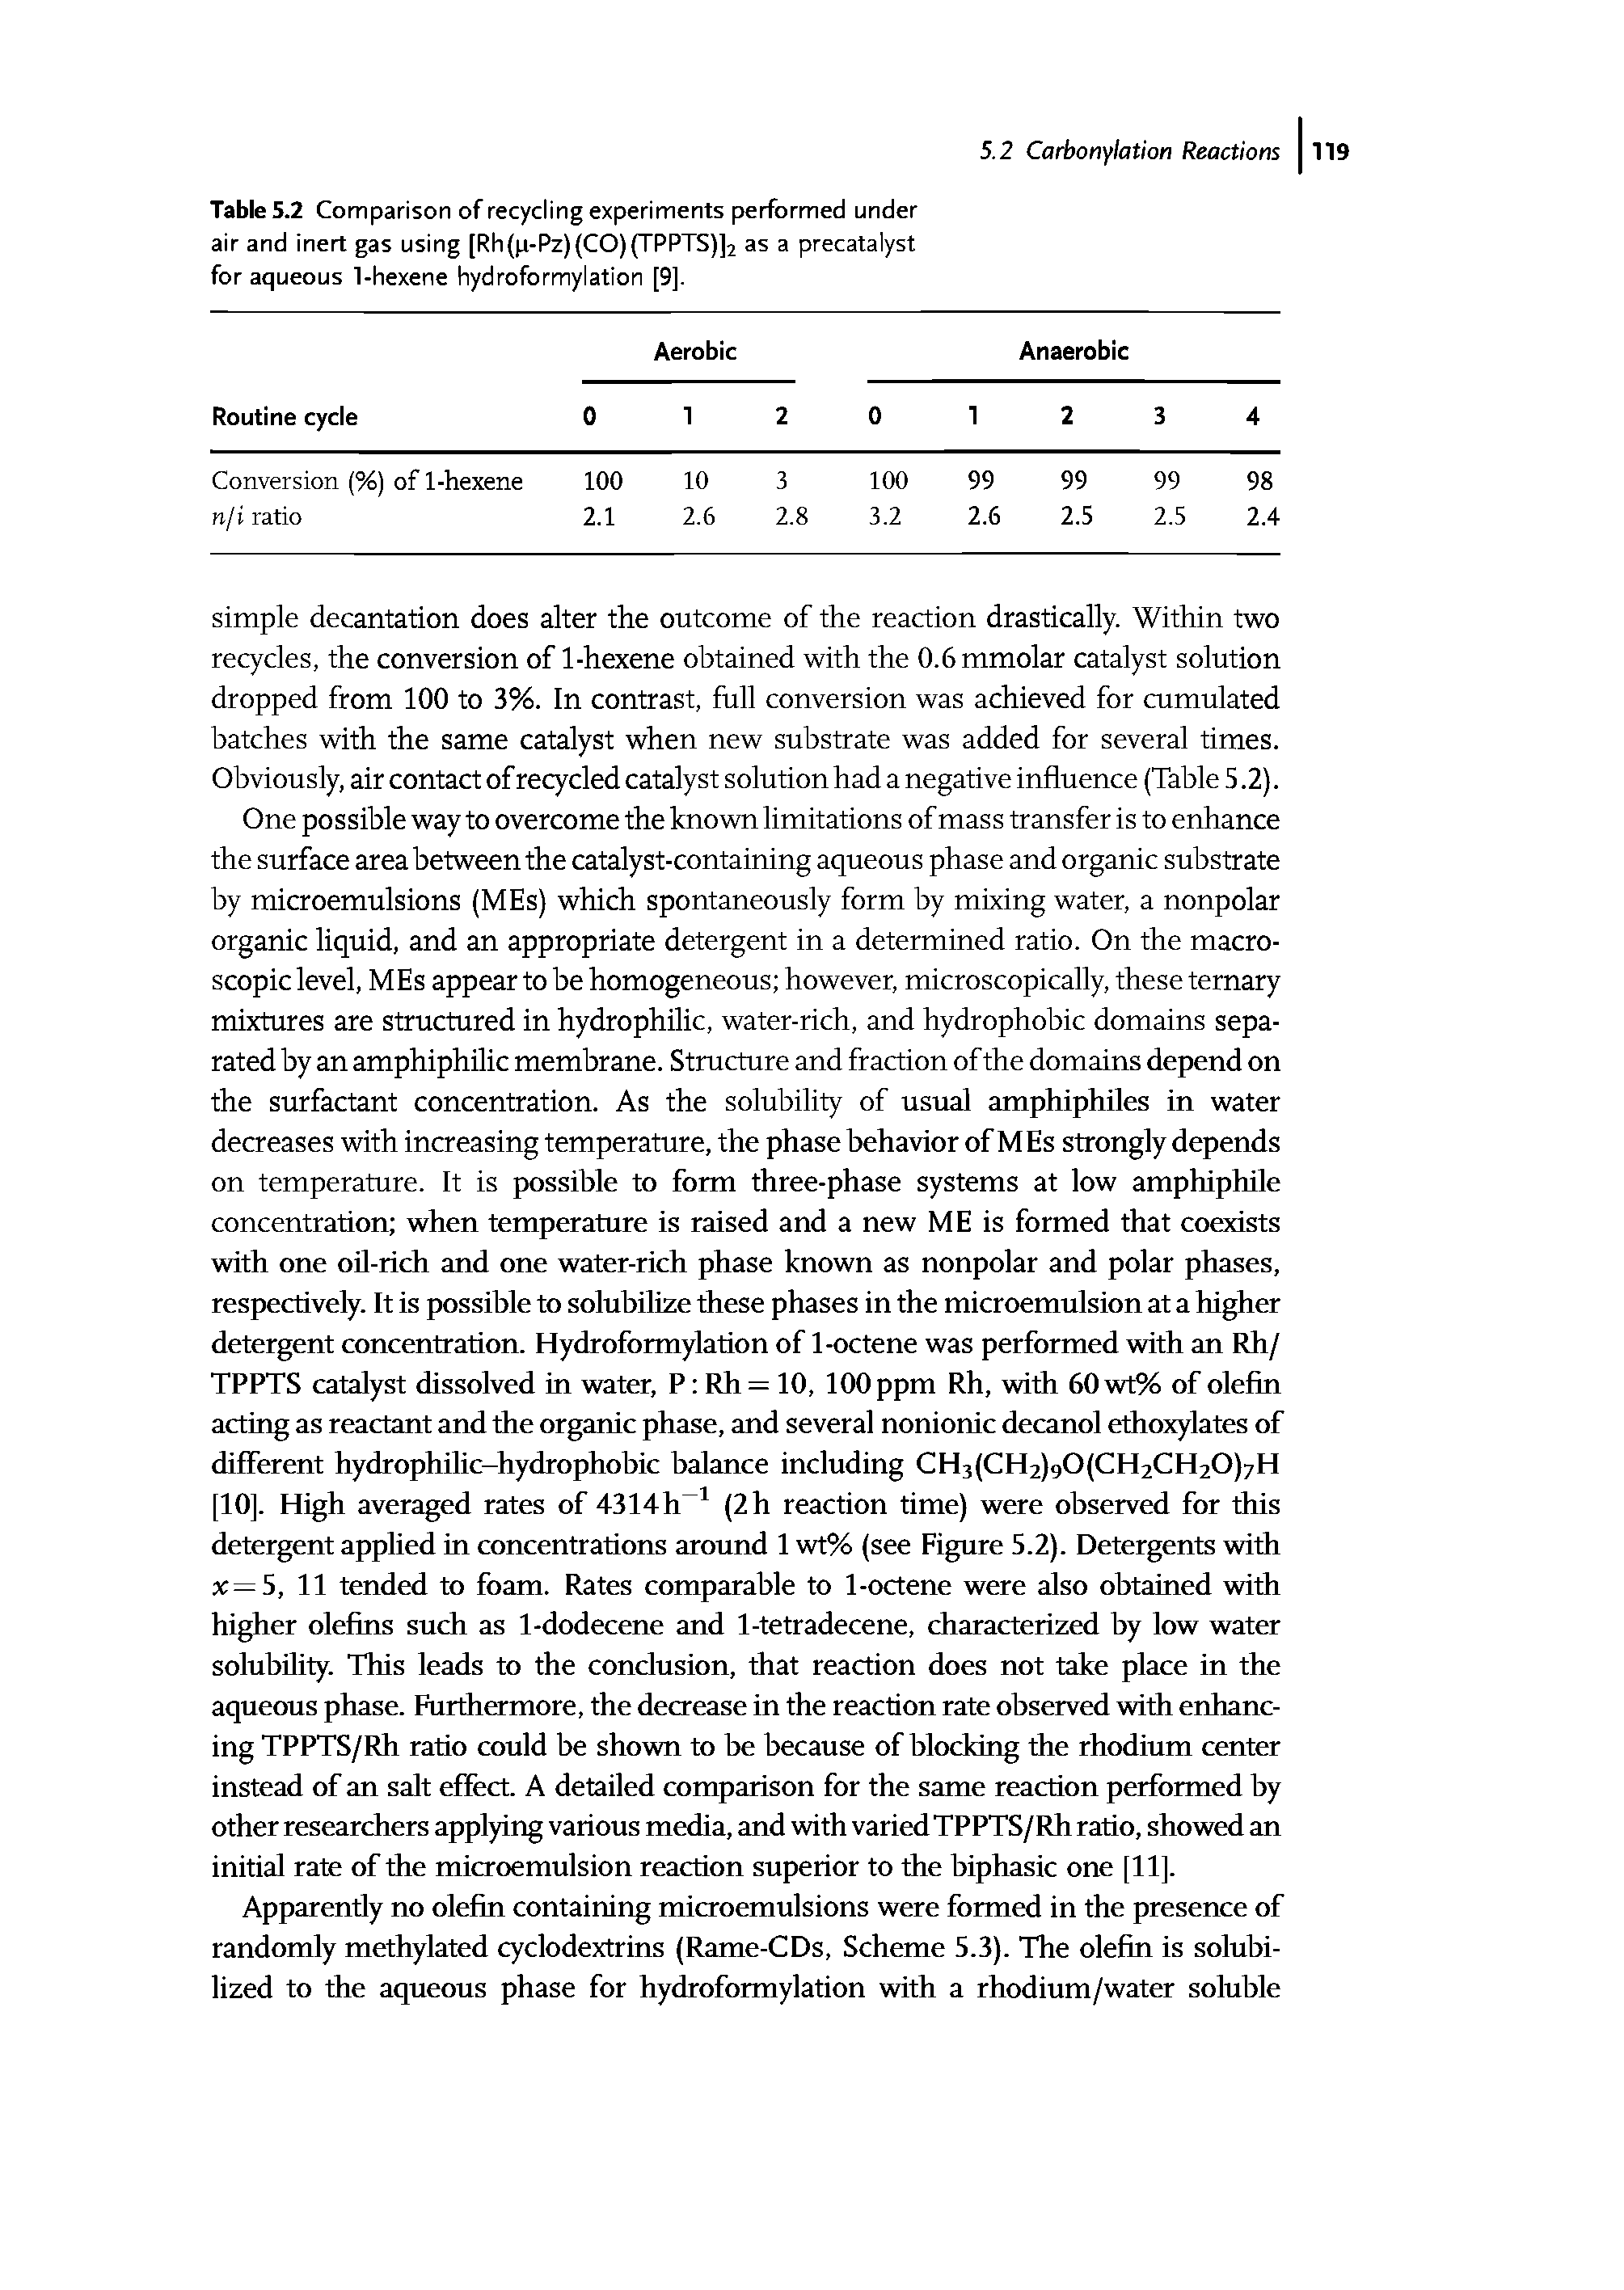 Table 5.2 Comparison of recycling experiments performed under air and inert gas using [Rh(p-Pz)(CO)(TPPTS)]2 as a precatalyst for aqueous 1-hexene hydroformylation [9].